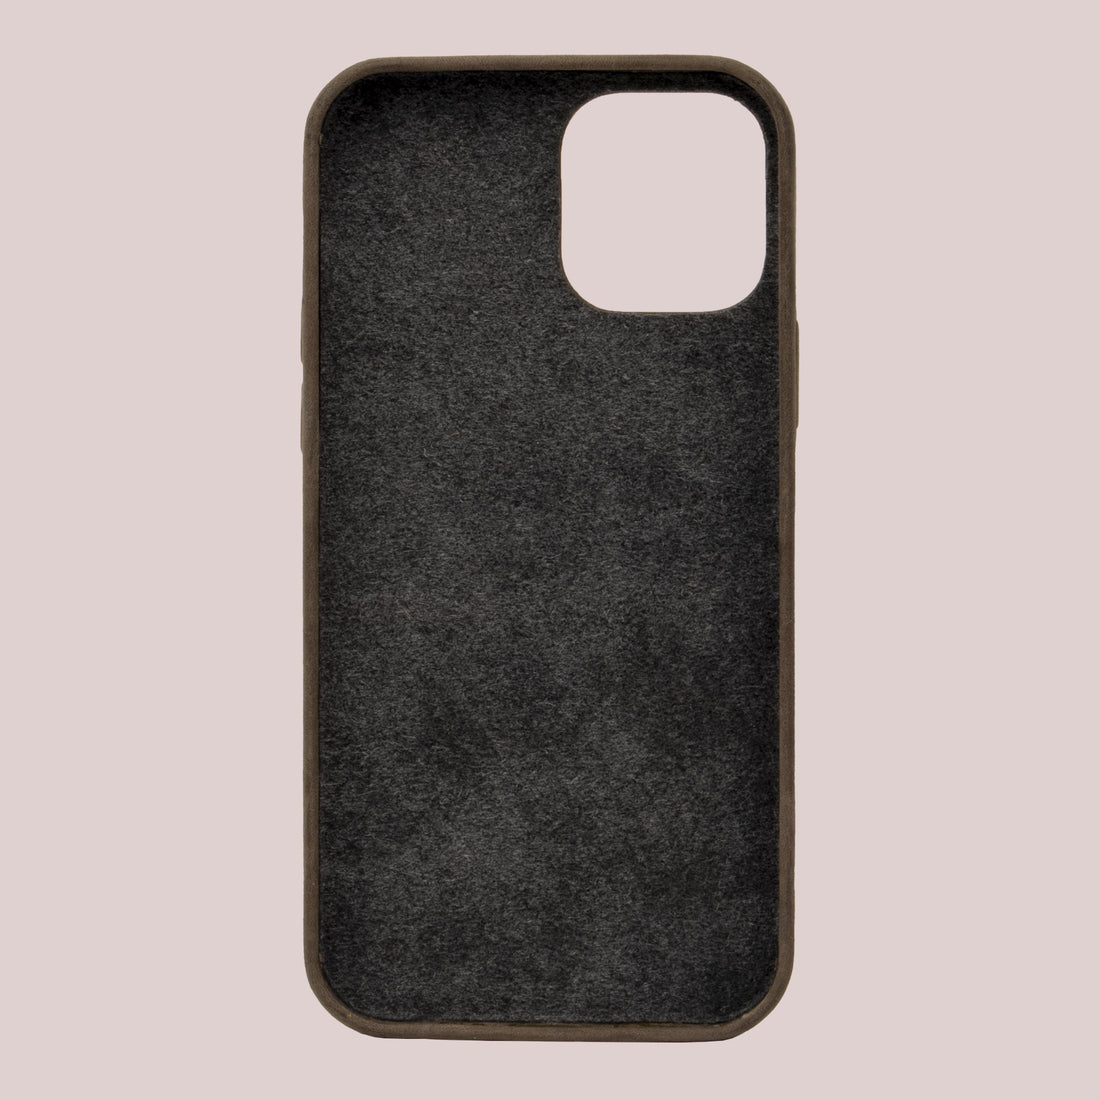 Baxter Card Case for iPhone 13 series - Onyx Black